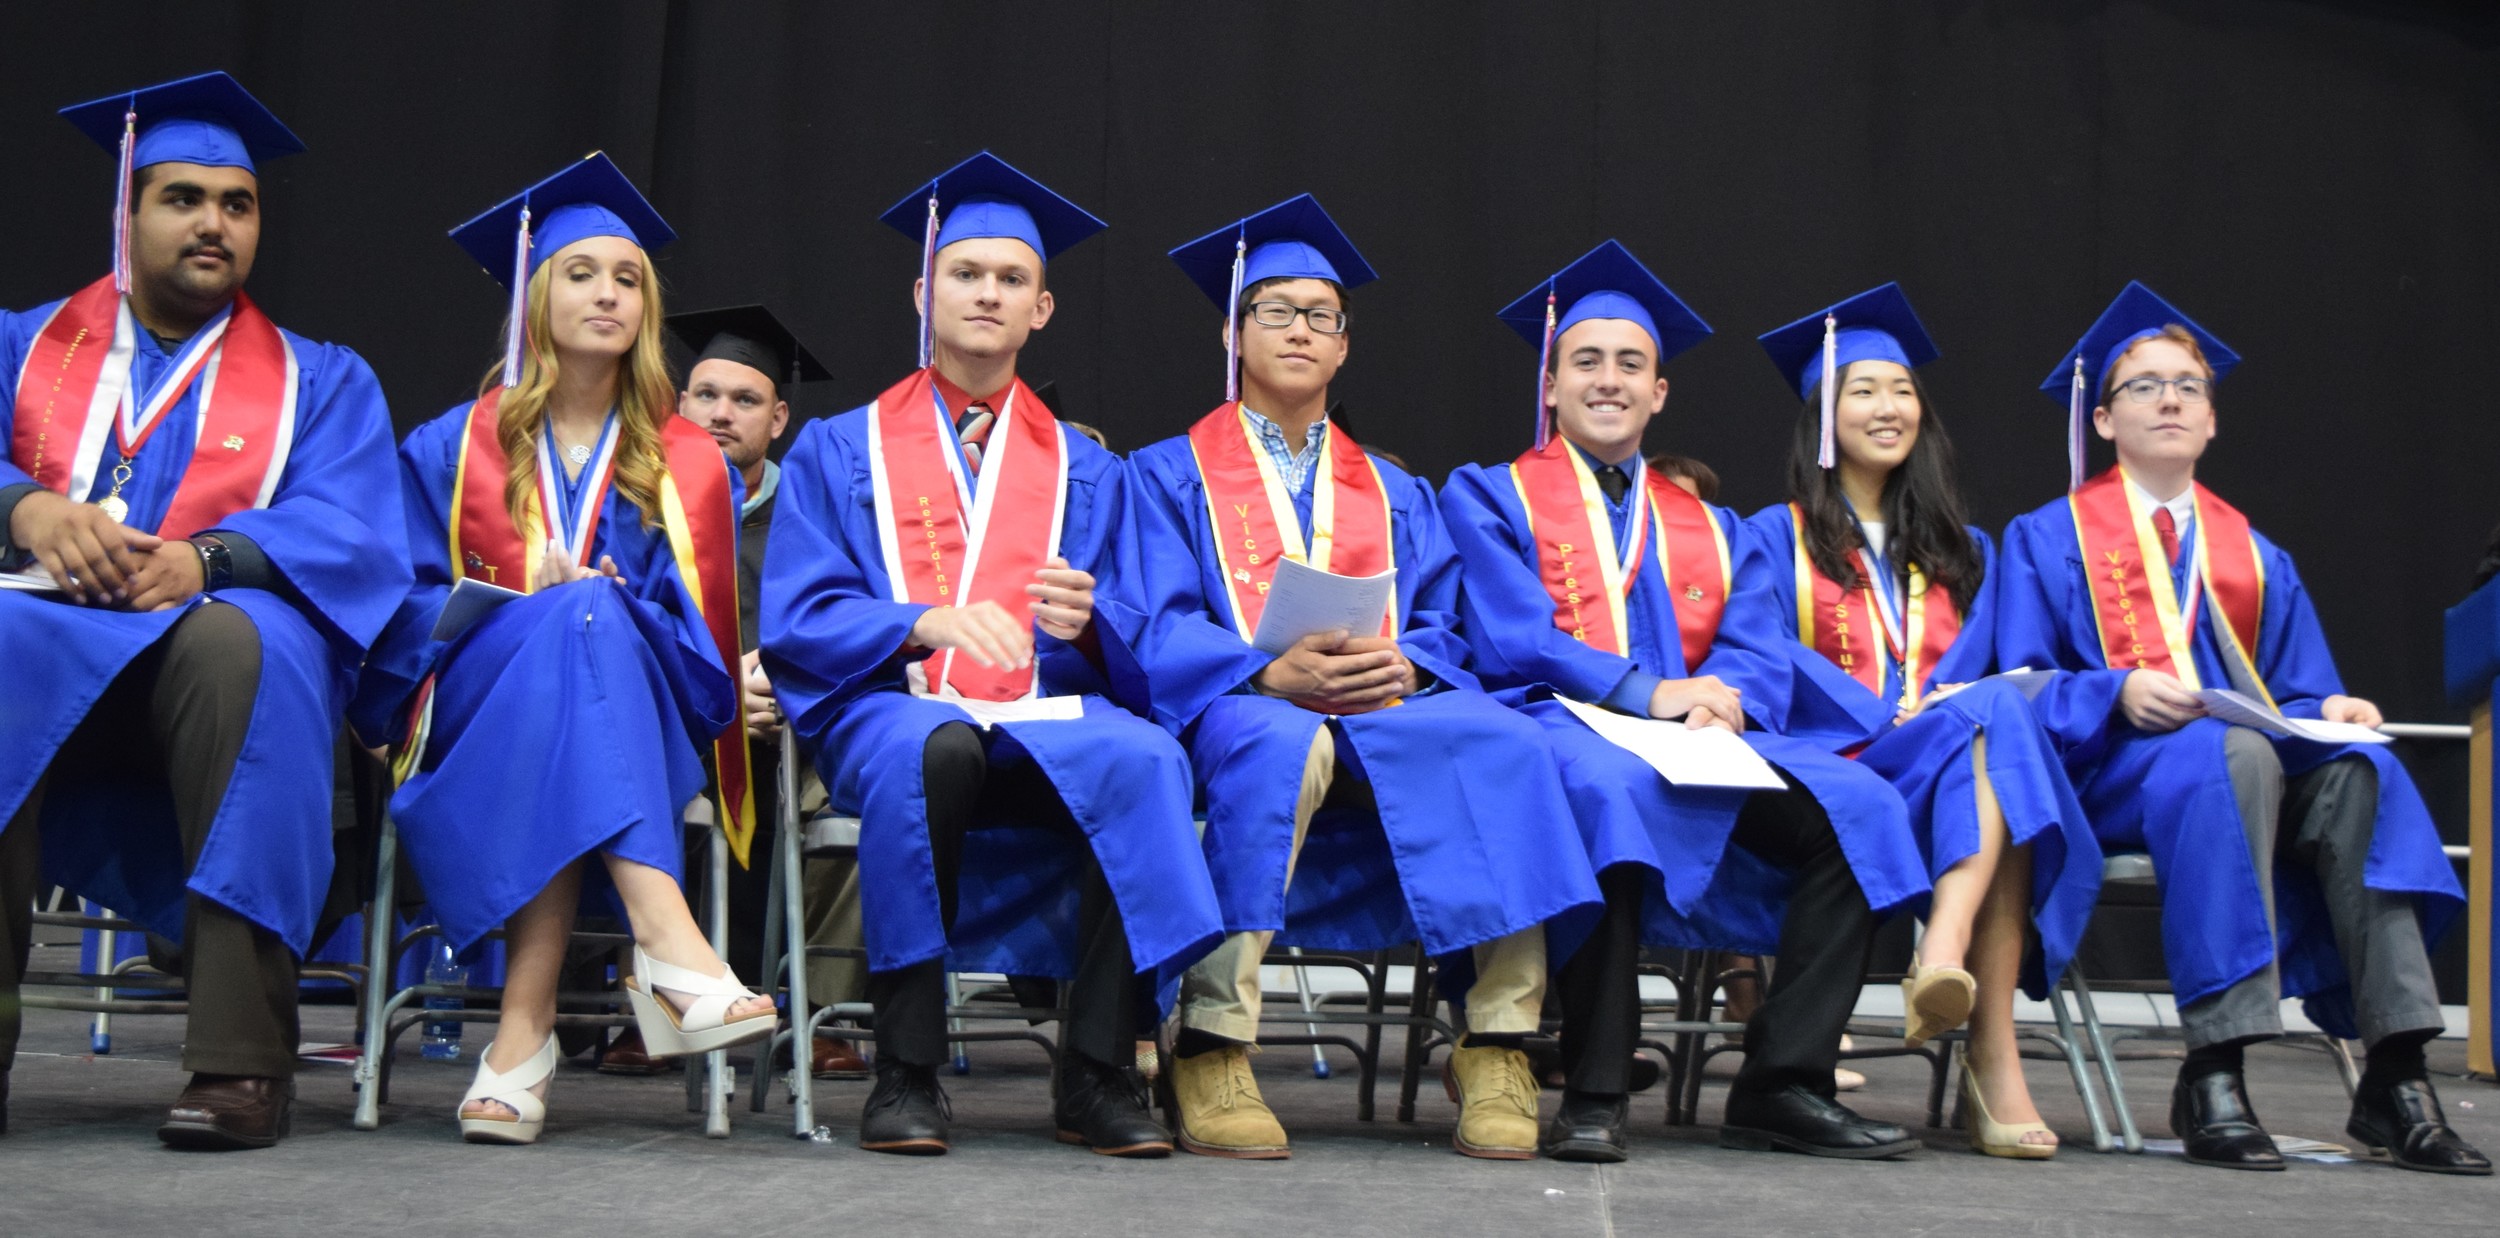 Students on Stage for MacArthur’s graduation ceremony included class officers, the valedictorian and salutatorian.